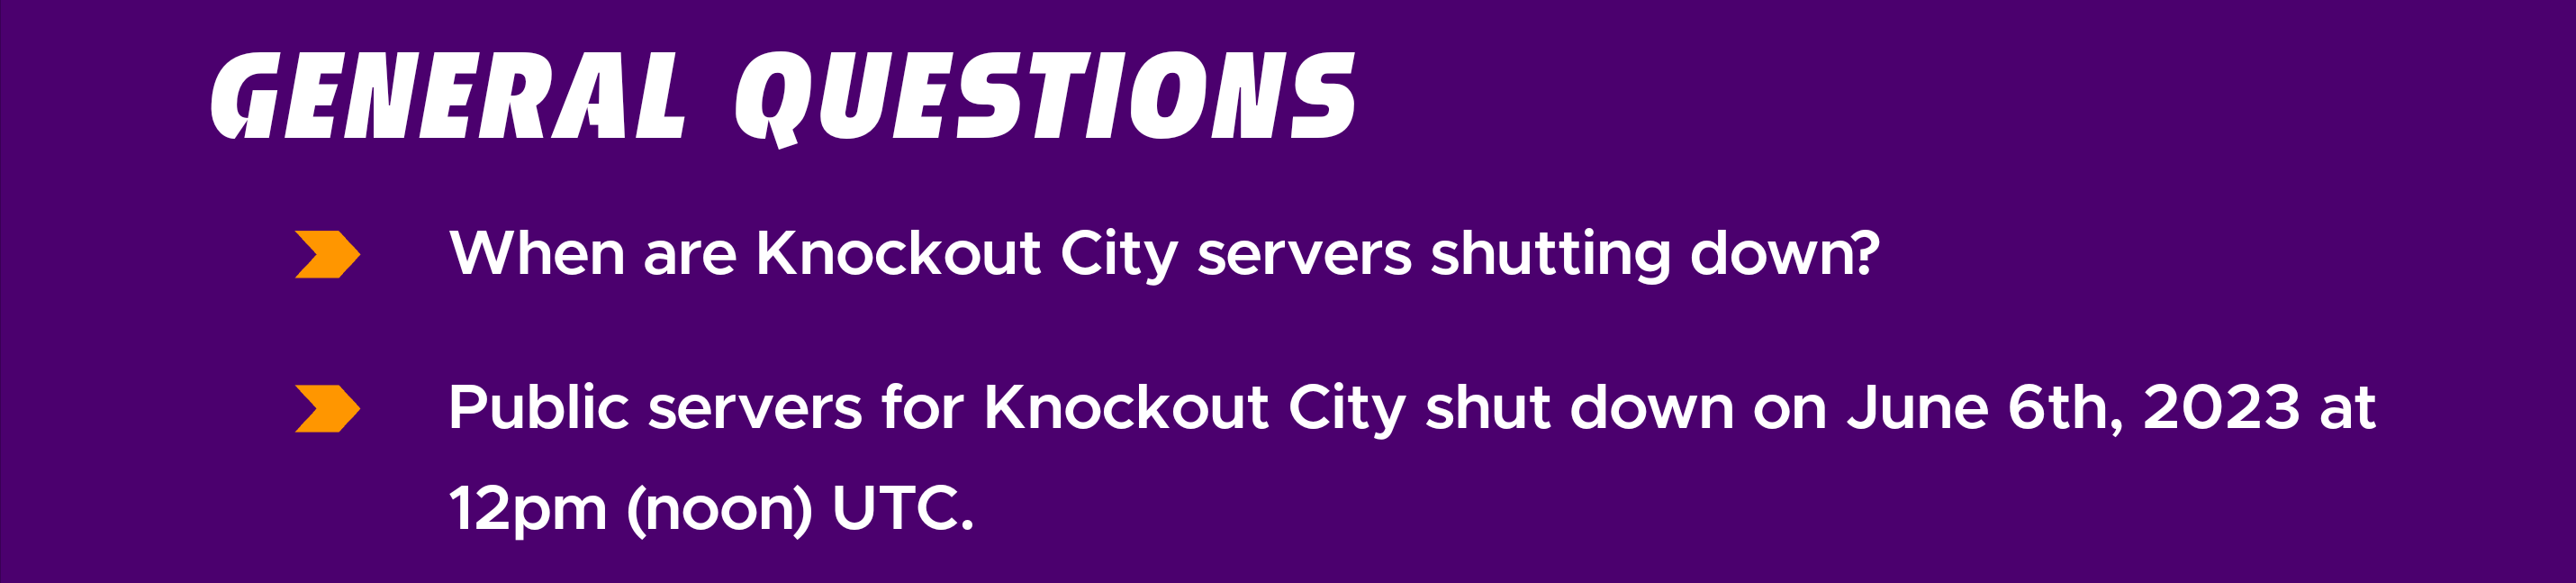 Knockout City servers are shutting down in June, with a private